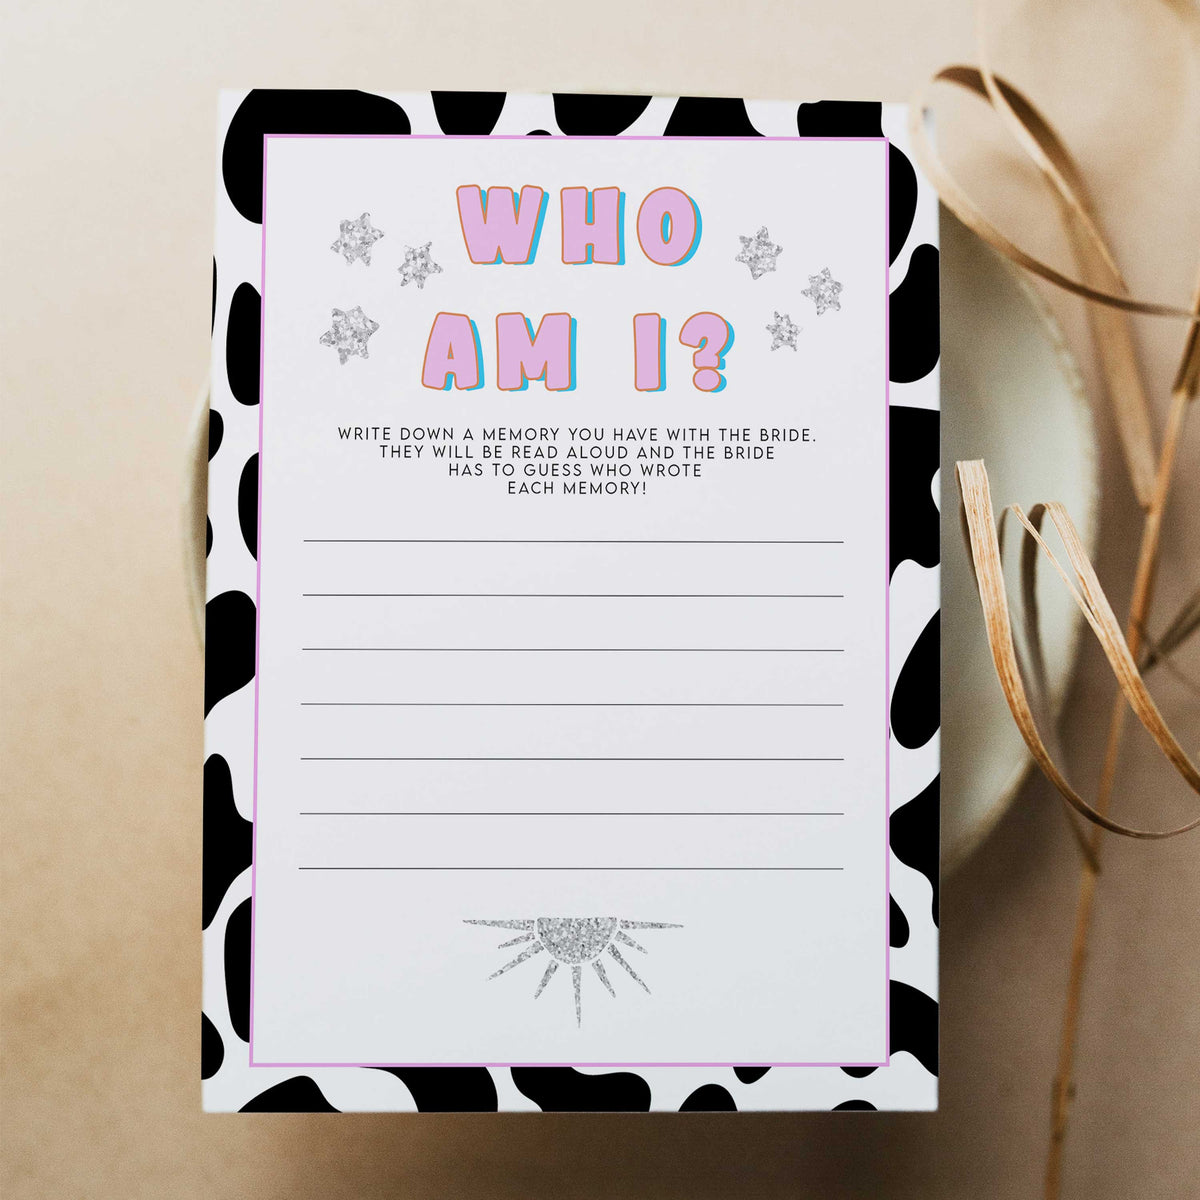 bridal who am I game, Space cowgirl bridal shower games, printable bridal shower games, bridal games, bridal shower games, disco bridal games